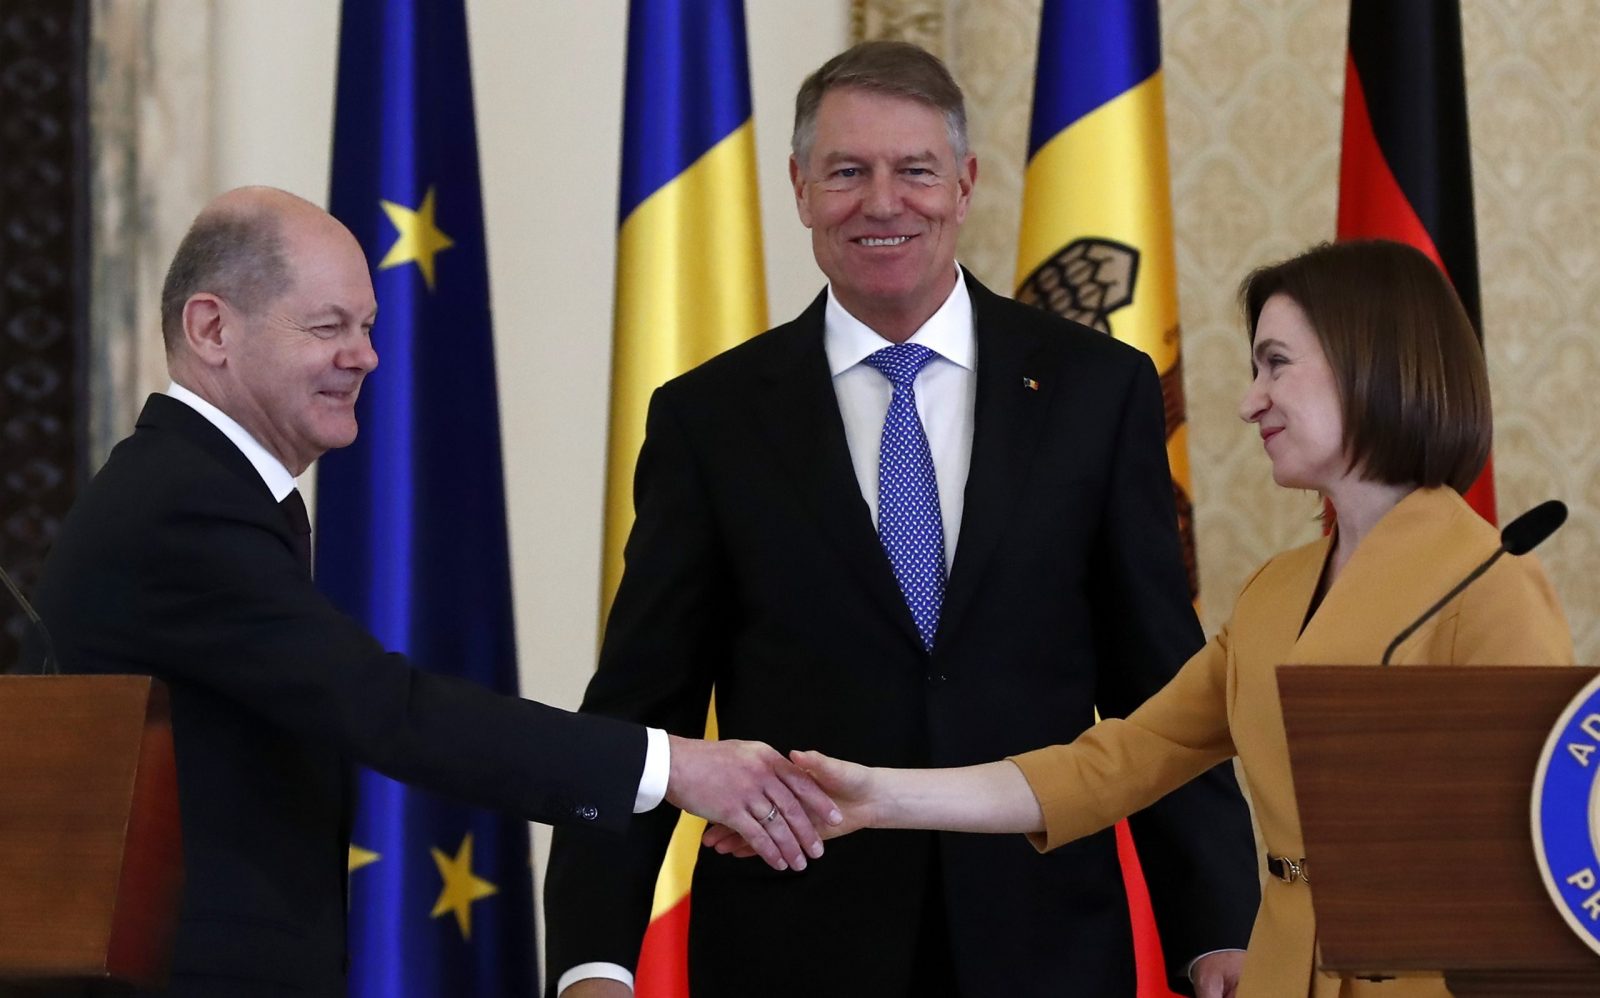 epa10557079 Moldova's President Maia Sandu (R) shakes hands with German Chancellor Olaf Scholz (L) as they are accompanied by Romanian President Klaus Iohannis (C) at the end of their joint media statements at Cotroceni Presidential Palace in Bucharest, Romania, 03 April 2023. Chancellor Scholz is on an official visit to Romania.  EPA/ROBERT GHEMENT